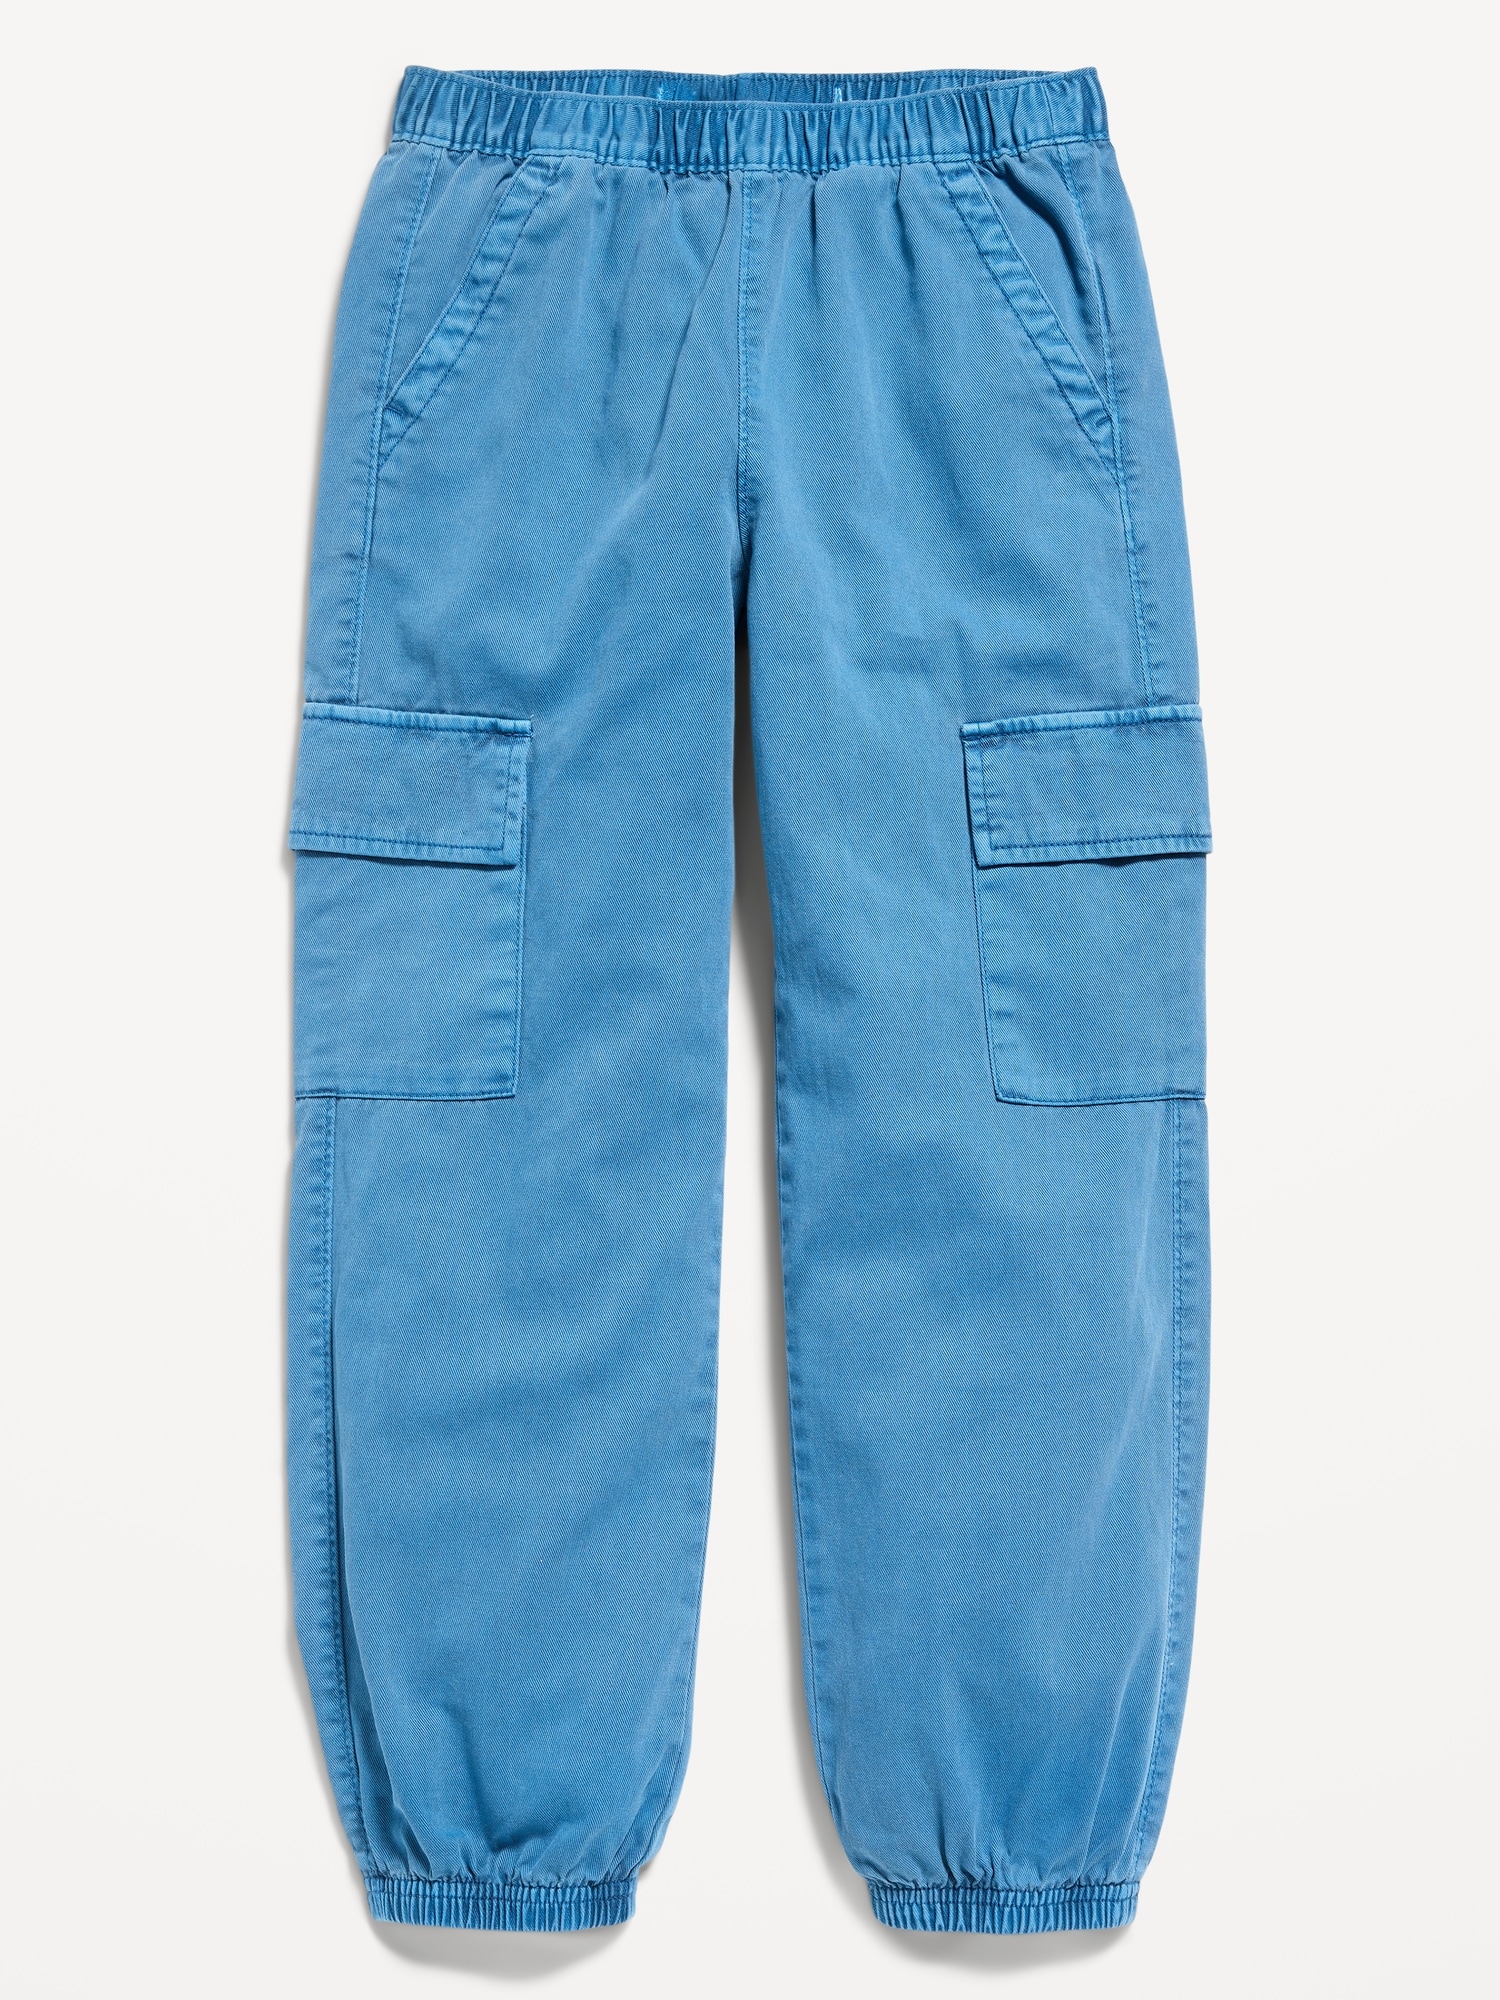 Twill Cargo Jogger Pants for Girls | Old Navy